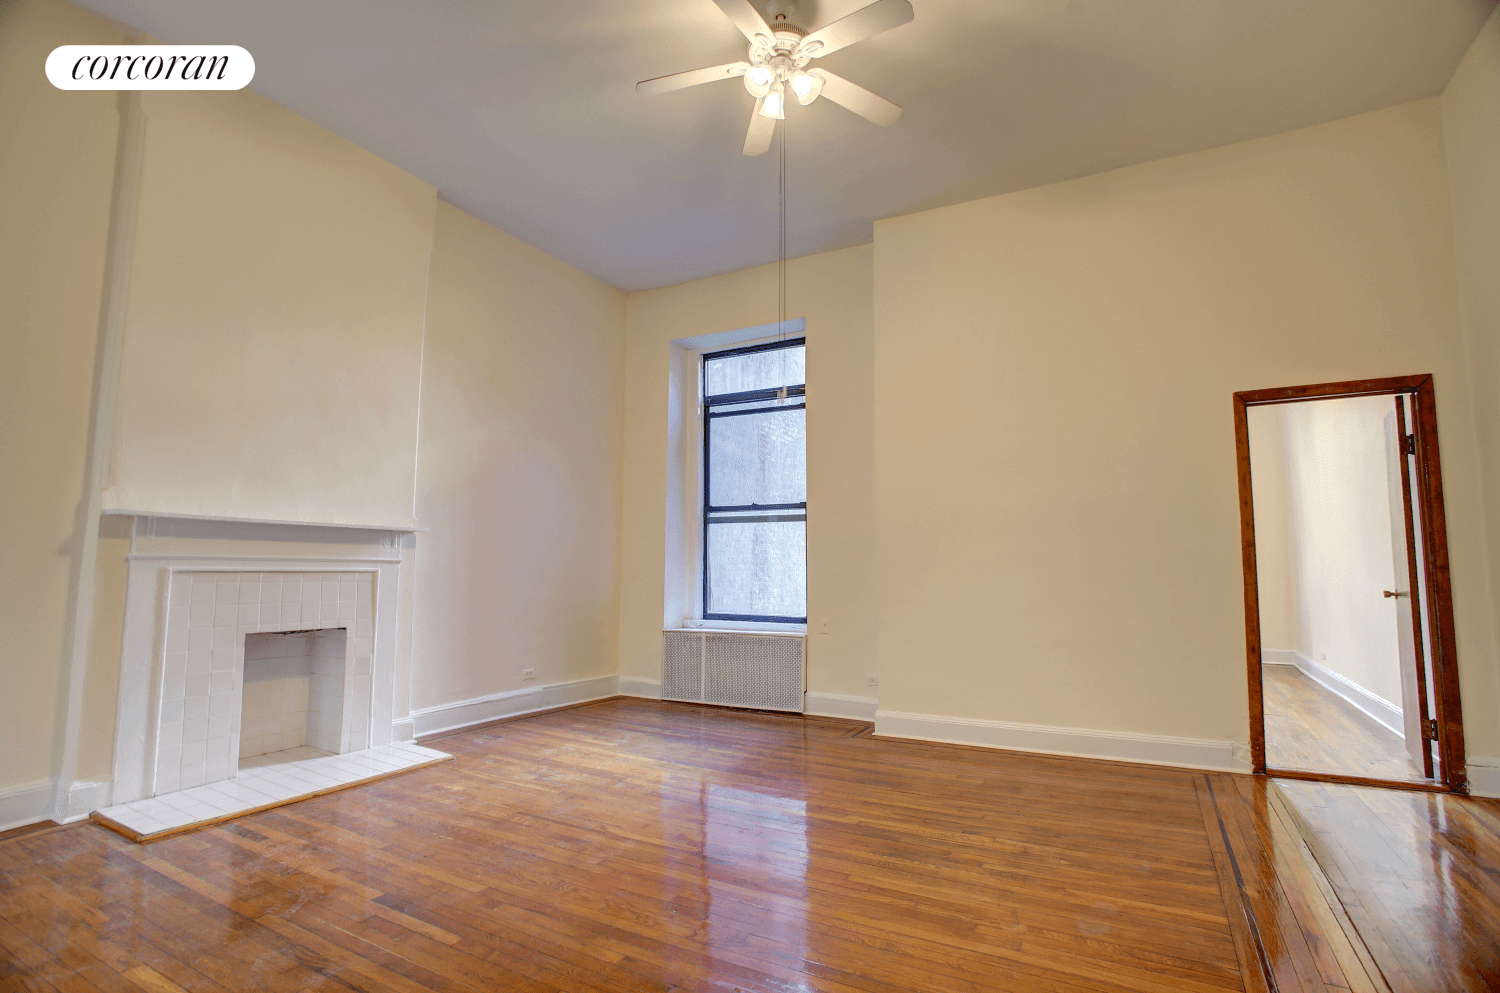 Spacious and bright one bedroom on W 73rd street off Broadway.